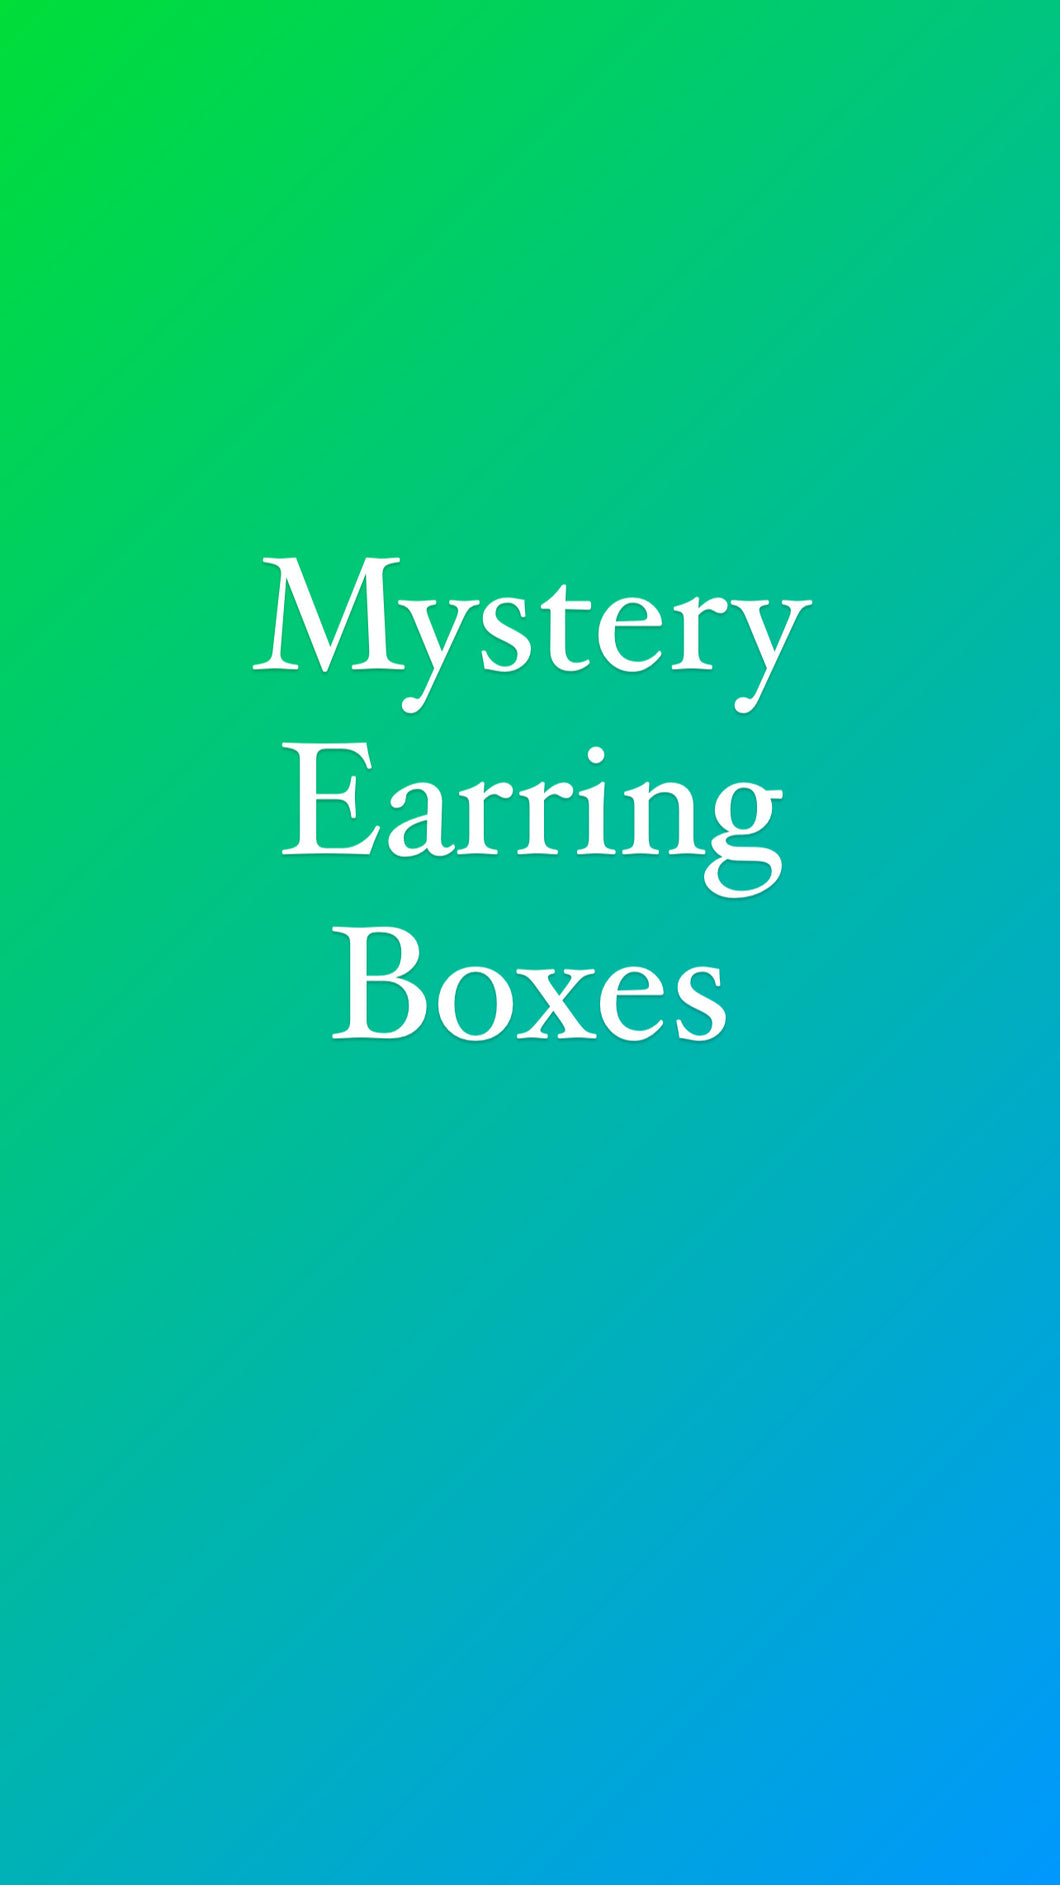 Mystery Earring Boxes